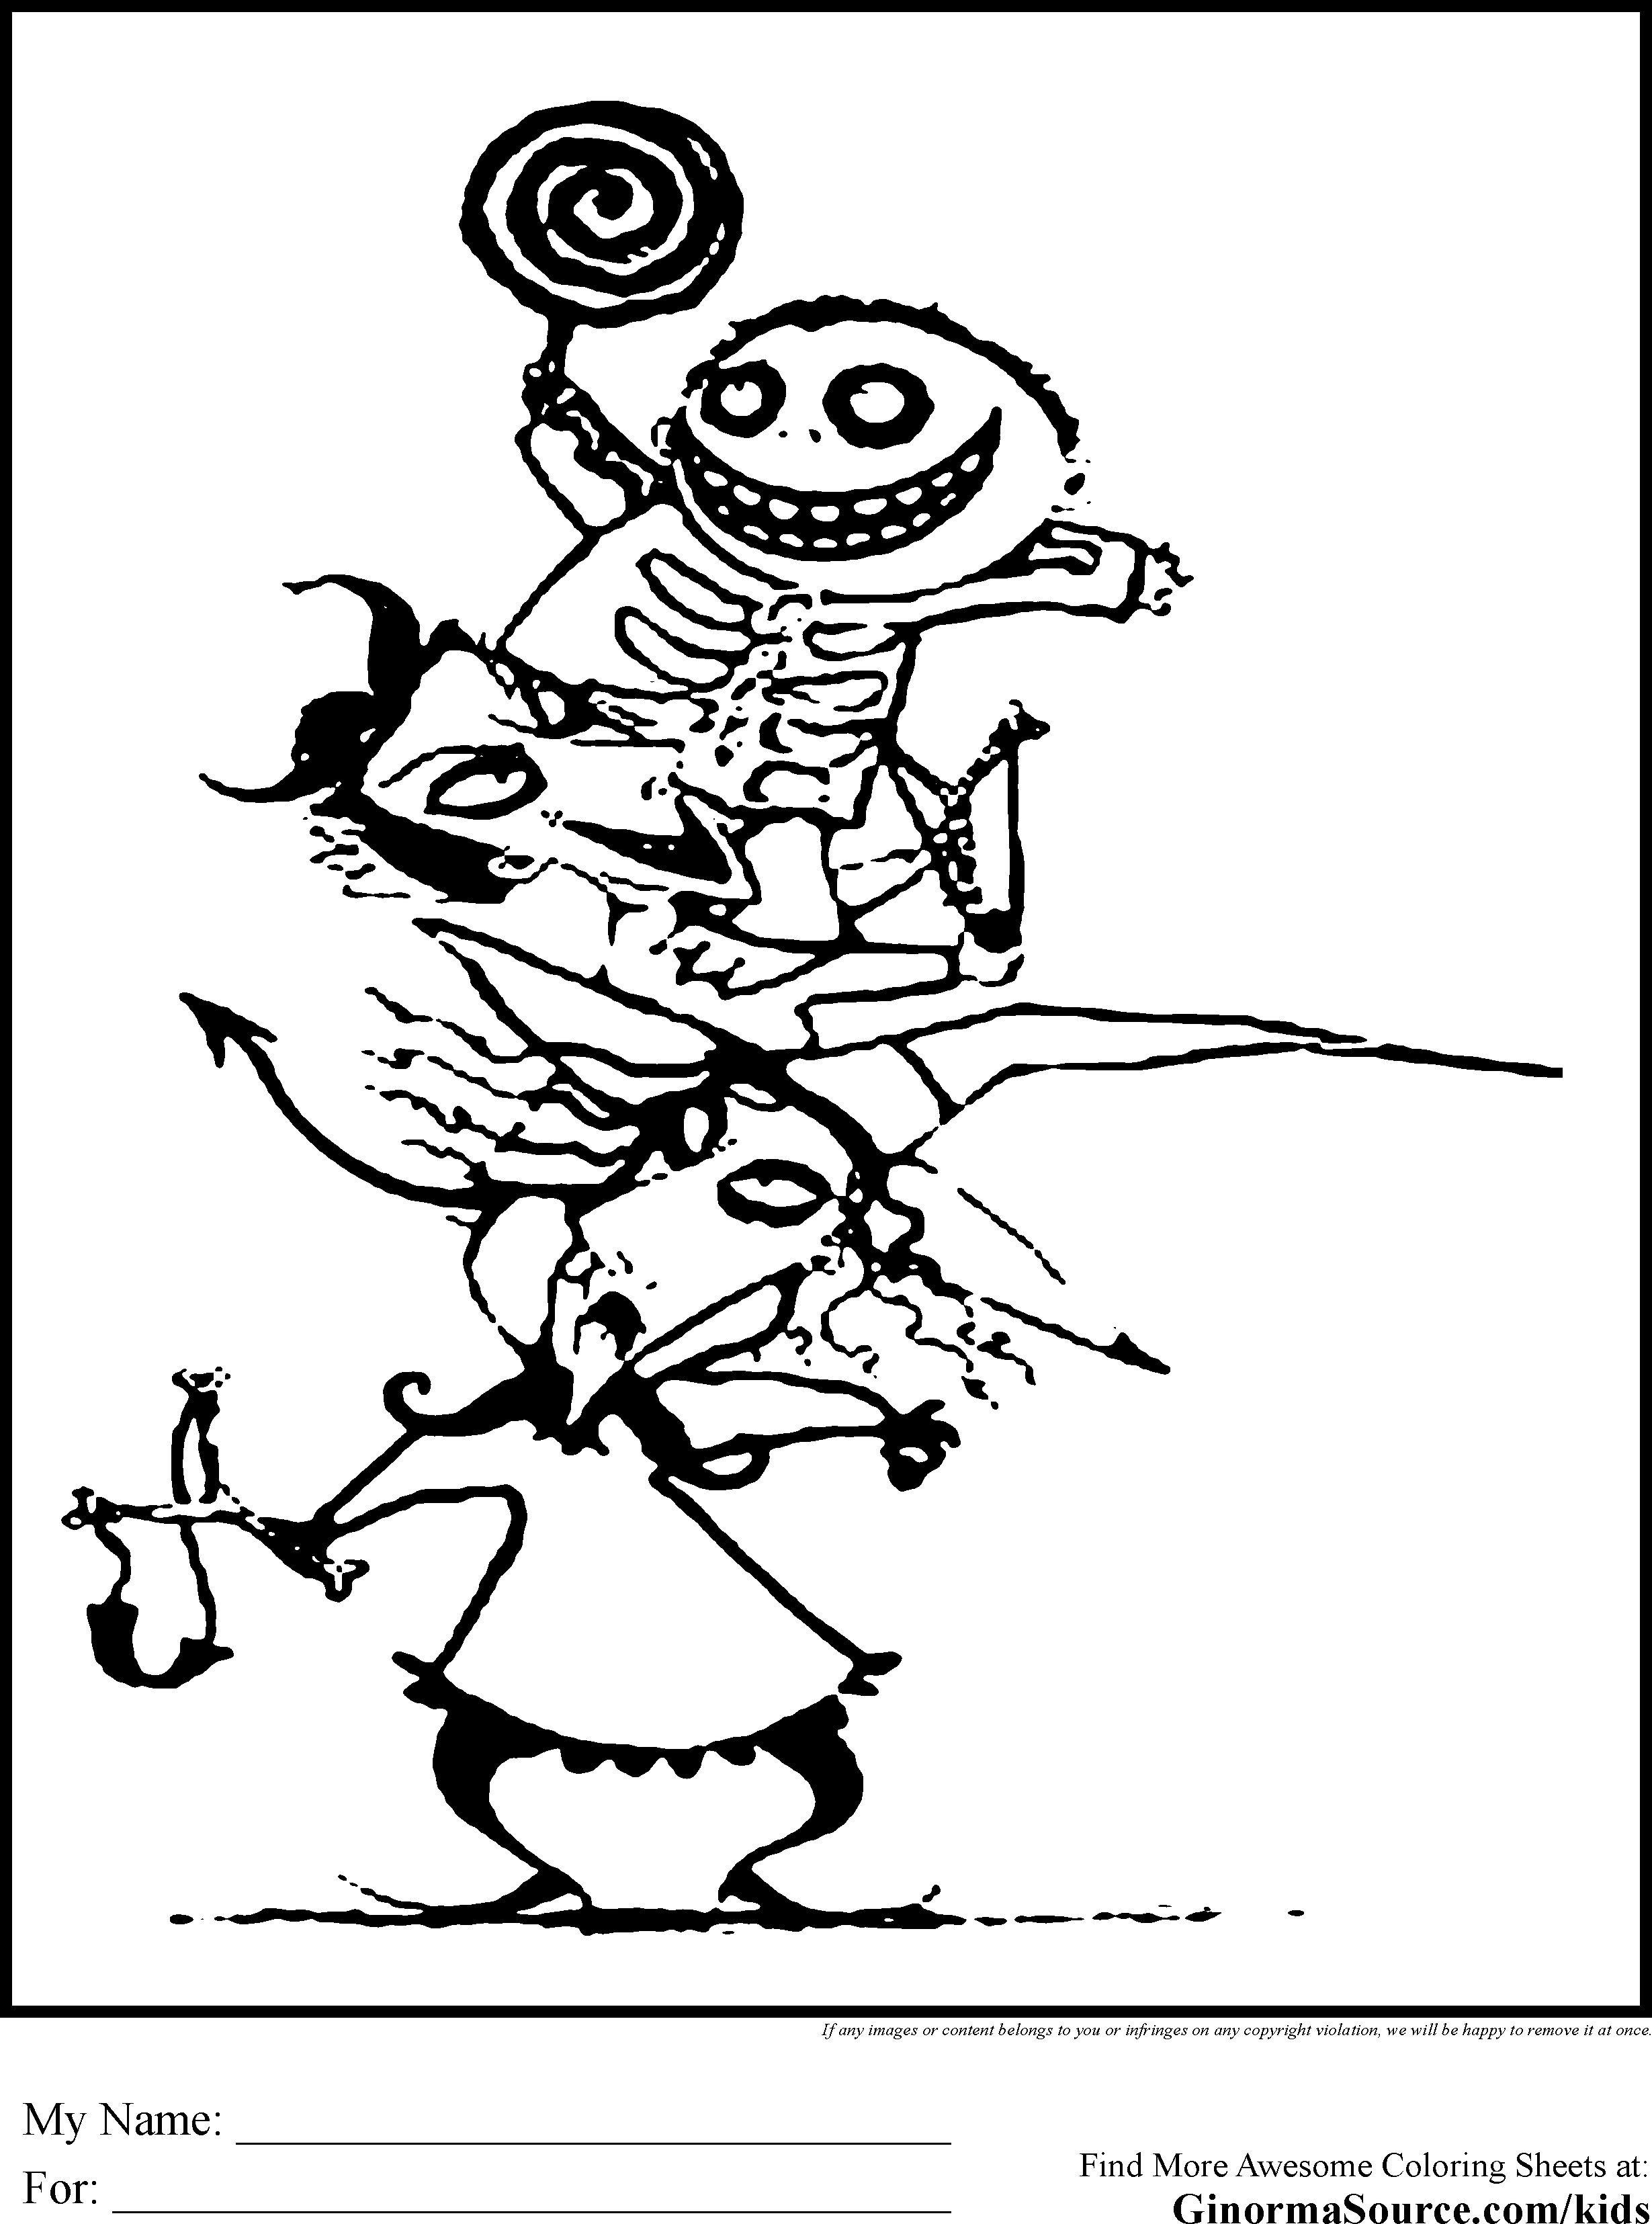 Nightmare-Before-Christmas-Coloring-Pages (2459Ã3310) | tim ...